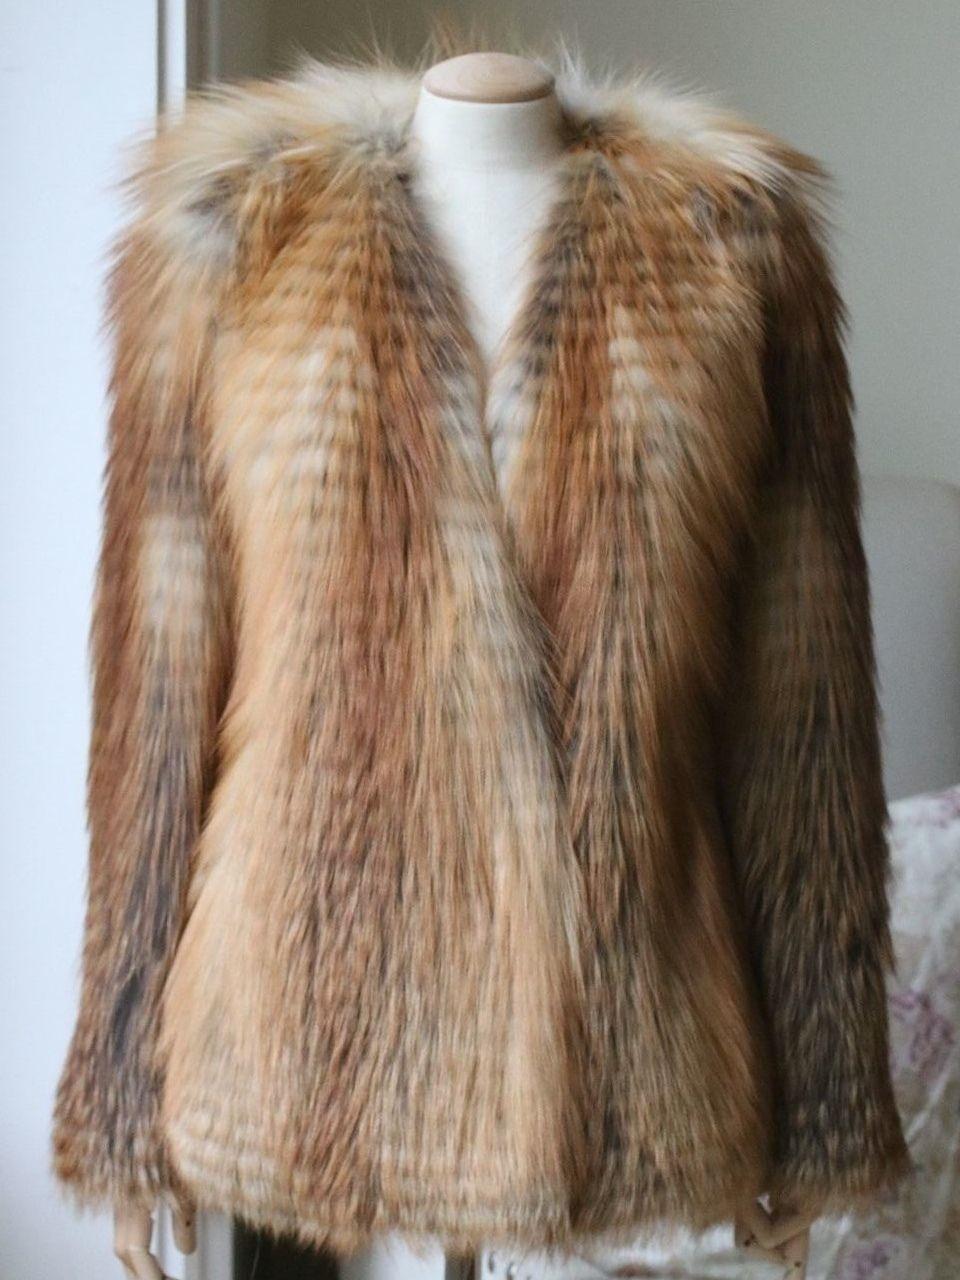 Balmain's tonal-brown fox-fur jacket is impeccably crafted in France. The slick, collarless shape is chic and timeless, while the waist-cinching black leather belt adds a tougher, contemporary attitude. Note the full silk lining – an exemplary